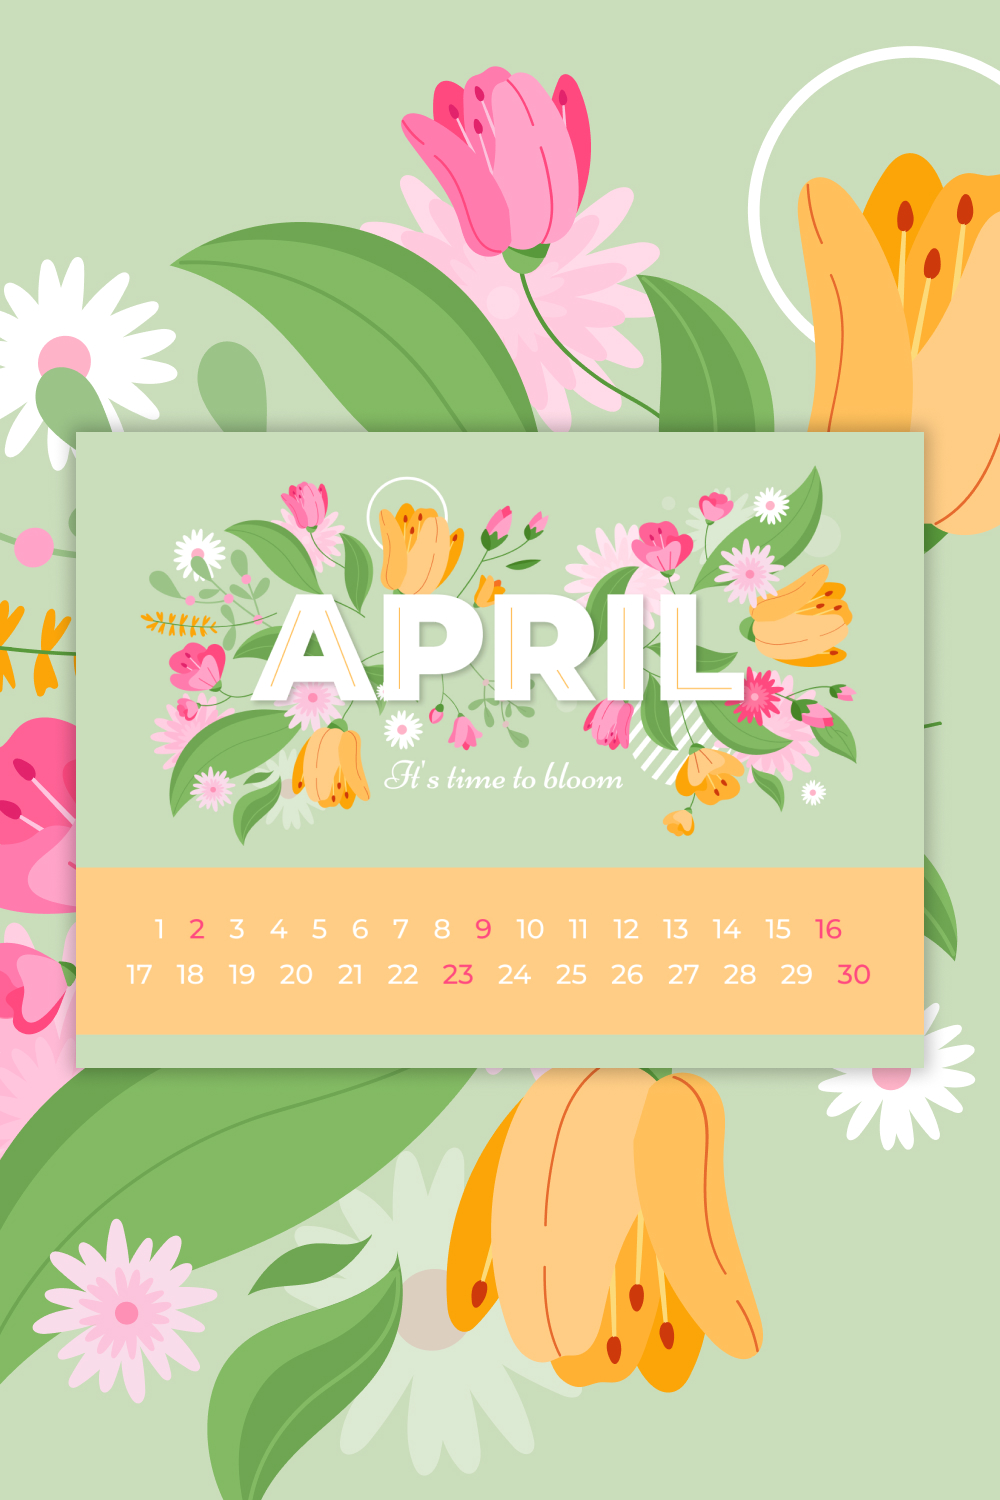 Calendar with flowers on a green background.